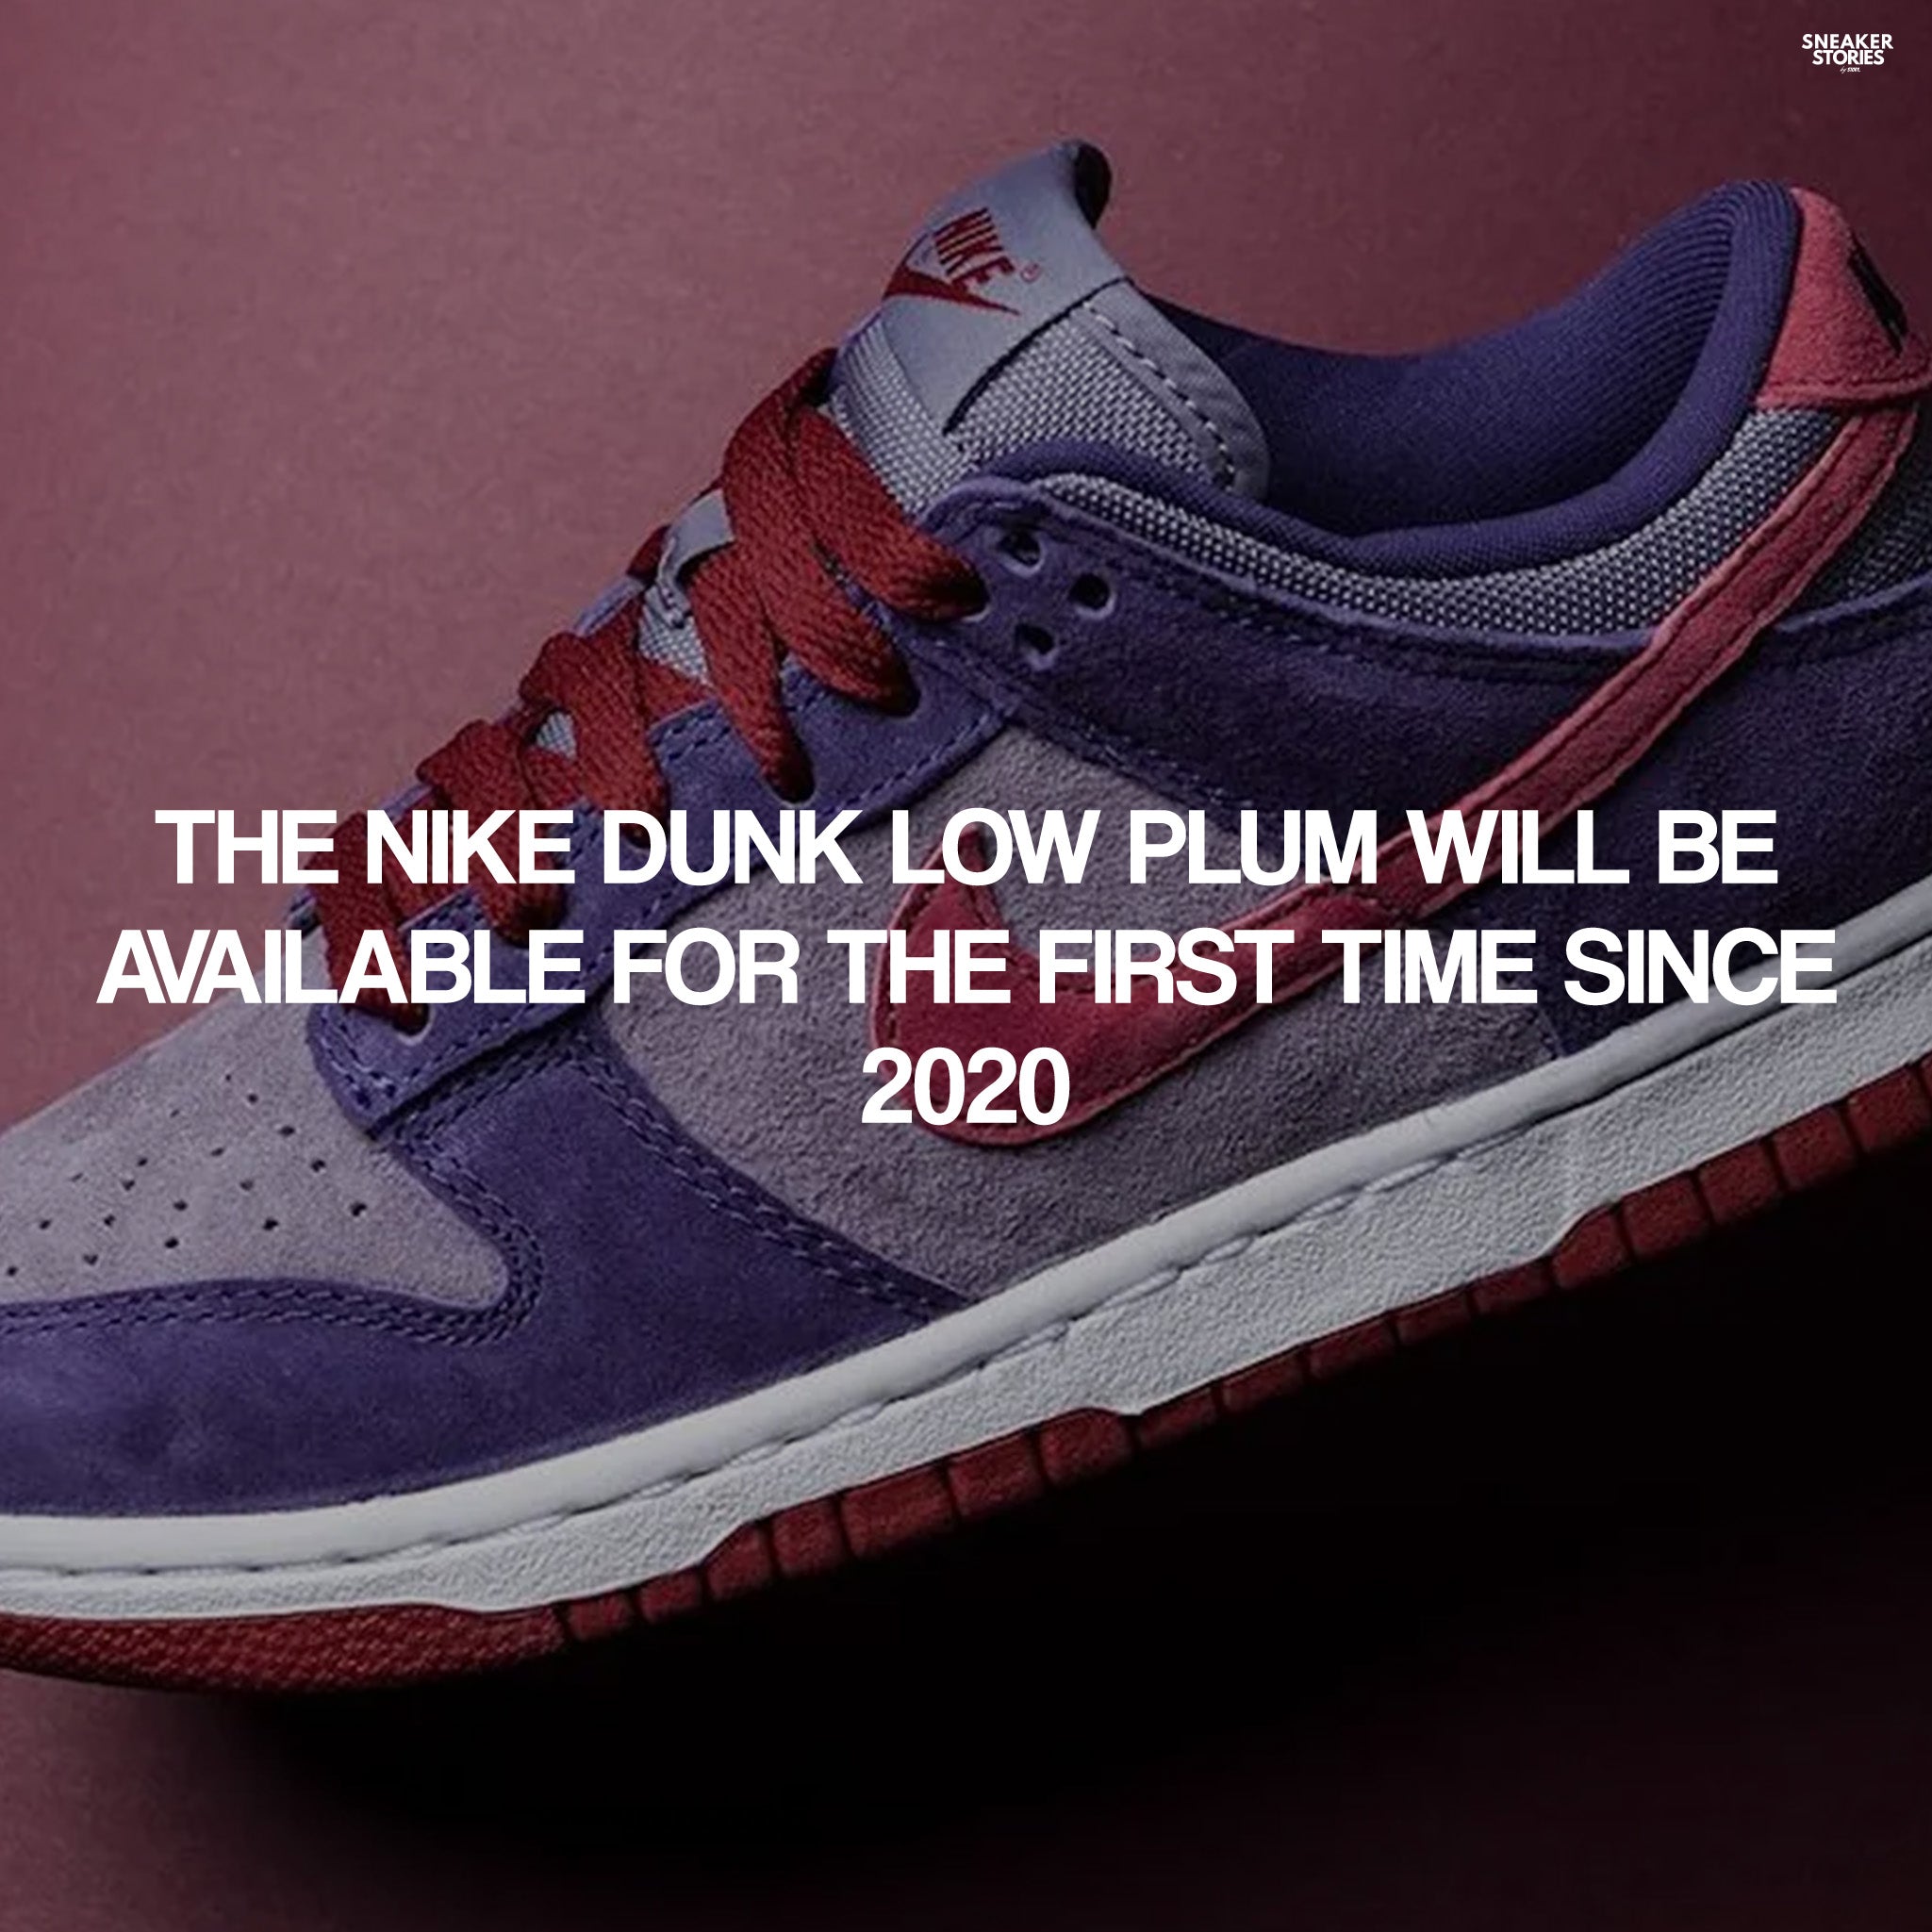 The Nike Dunk Low Plum will be available for the first time since 2020